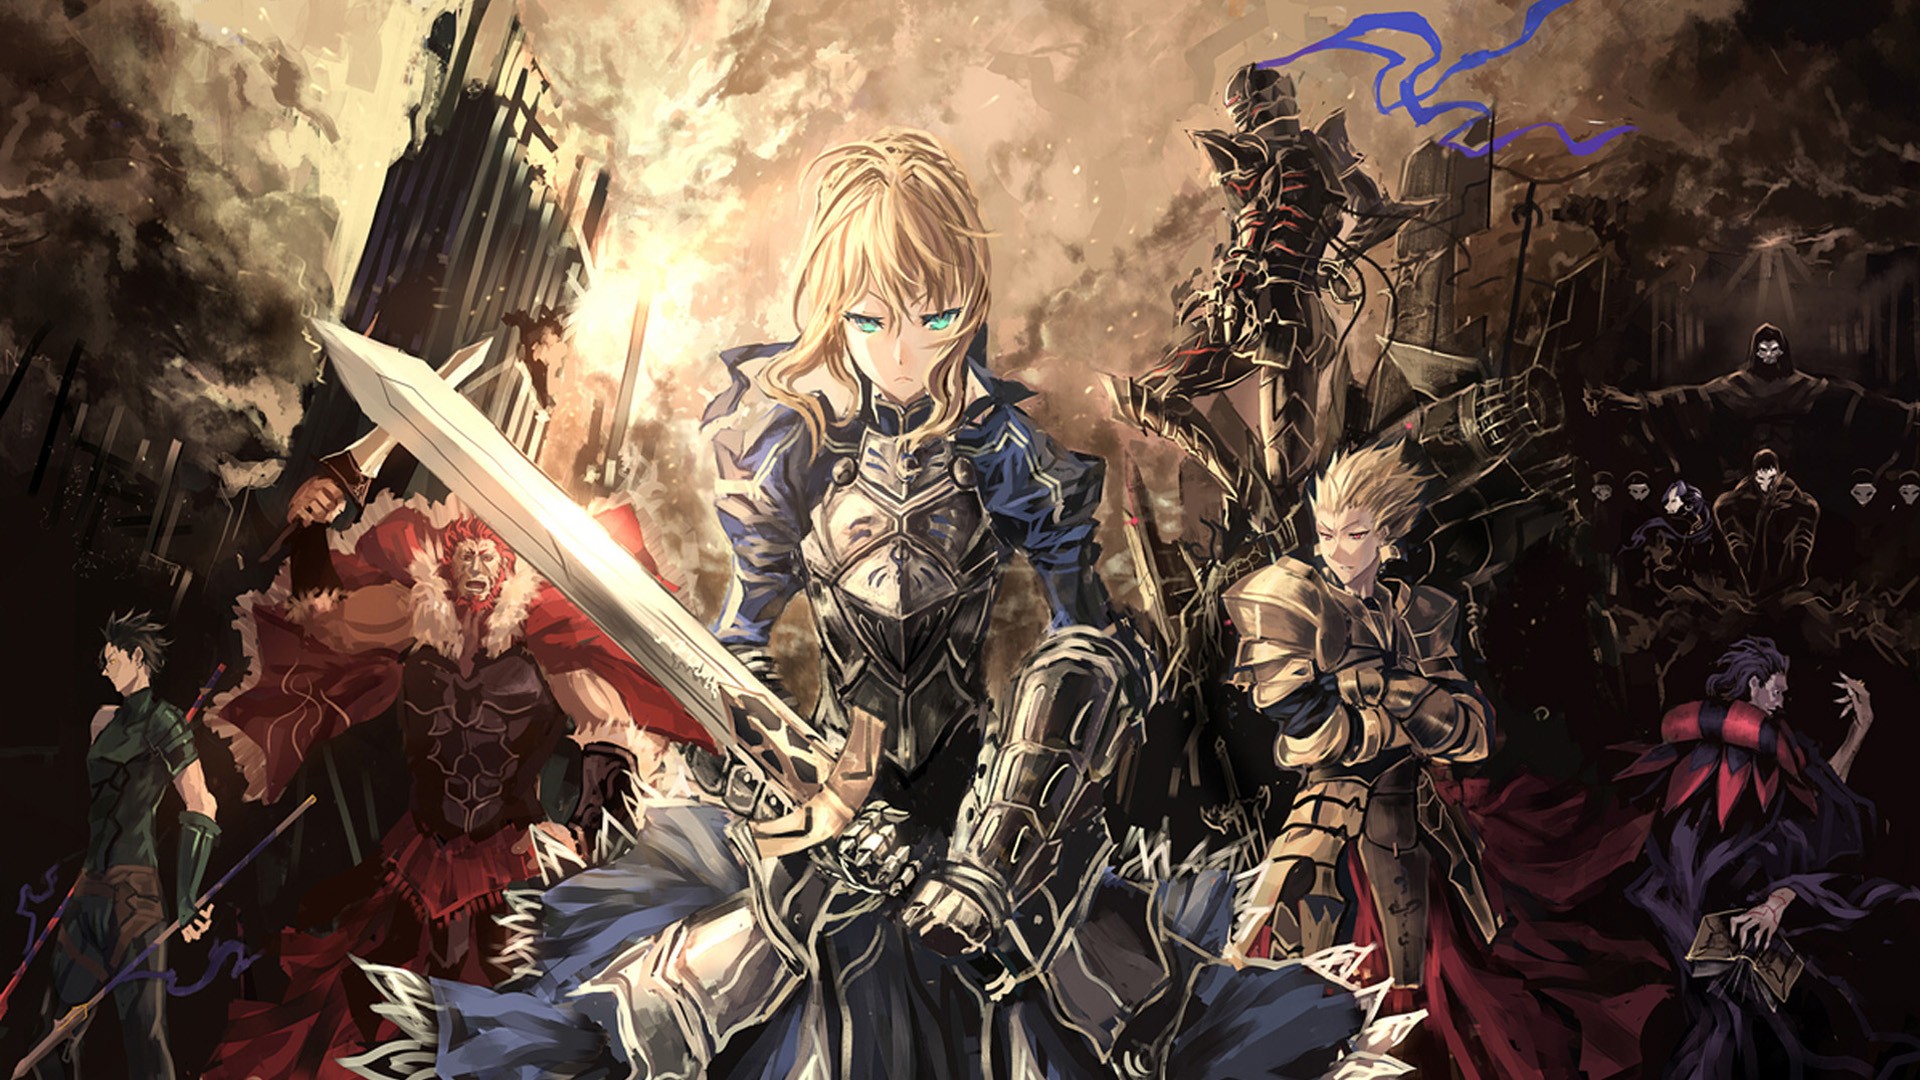 Fate Stay Night Anime Saber Lily Sword Armor Rider Fate Stay Night Lancer Fate Stay Night Short Hair 1920x1080